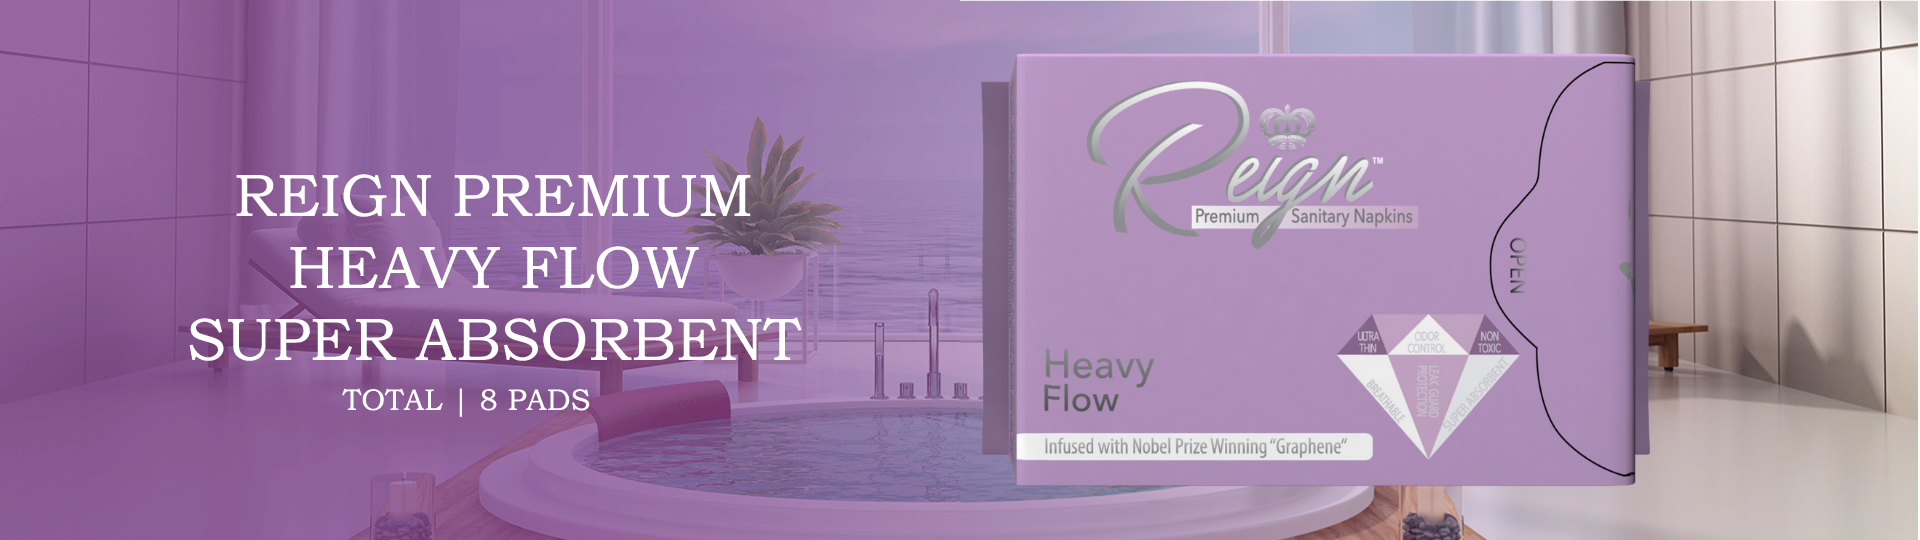 reign-pads-heavy-spa-pool-header-1920x540